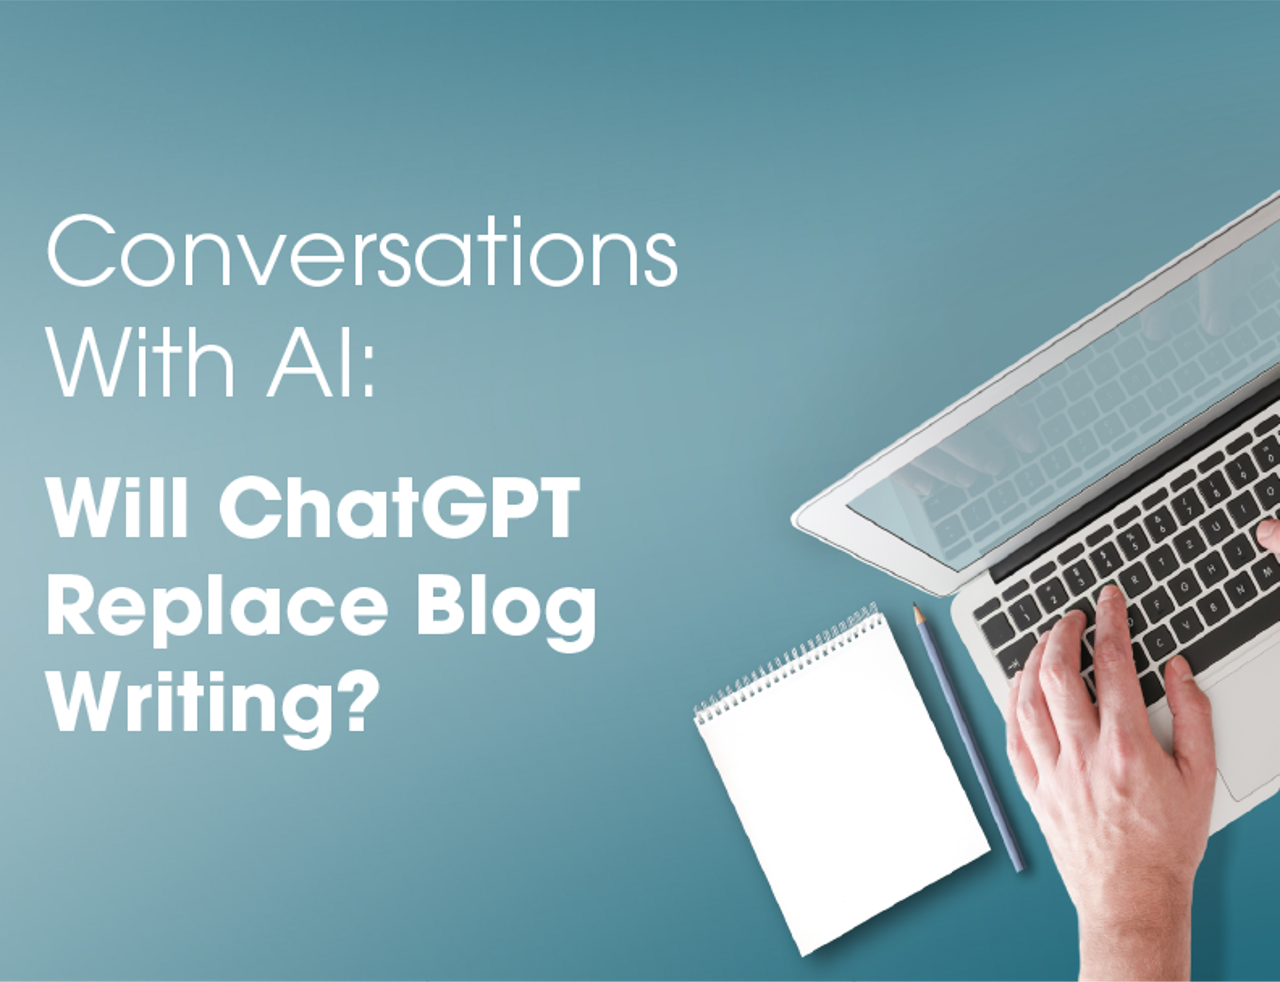 Conversations With AI: Will ChatGPT Replace Blog Writing?